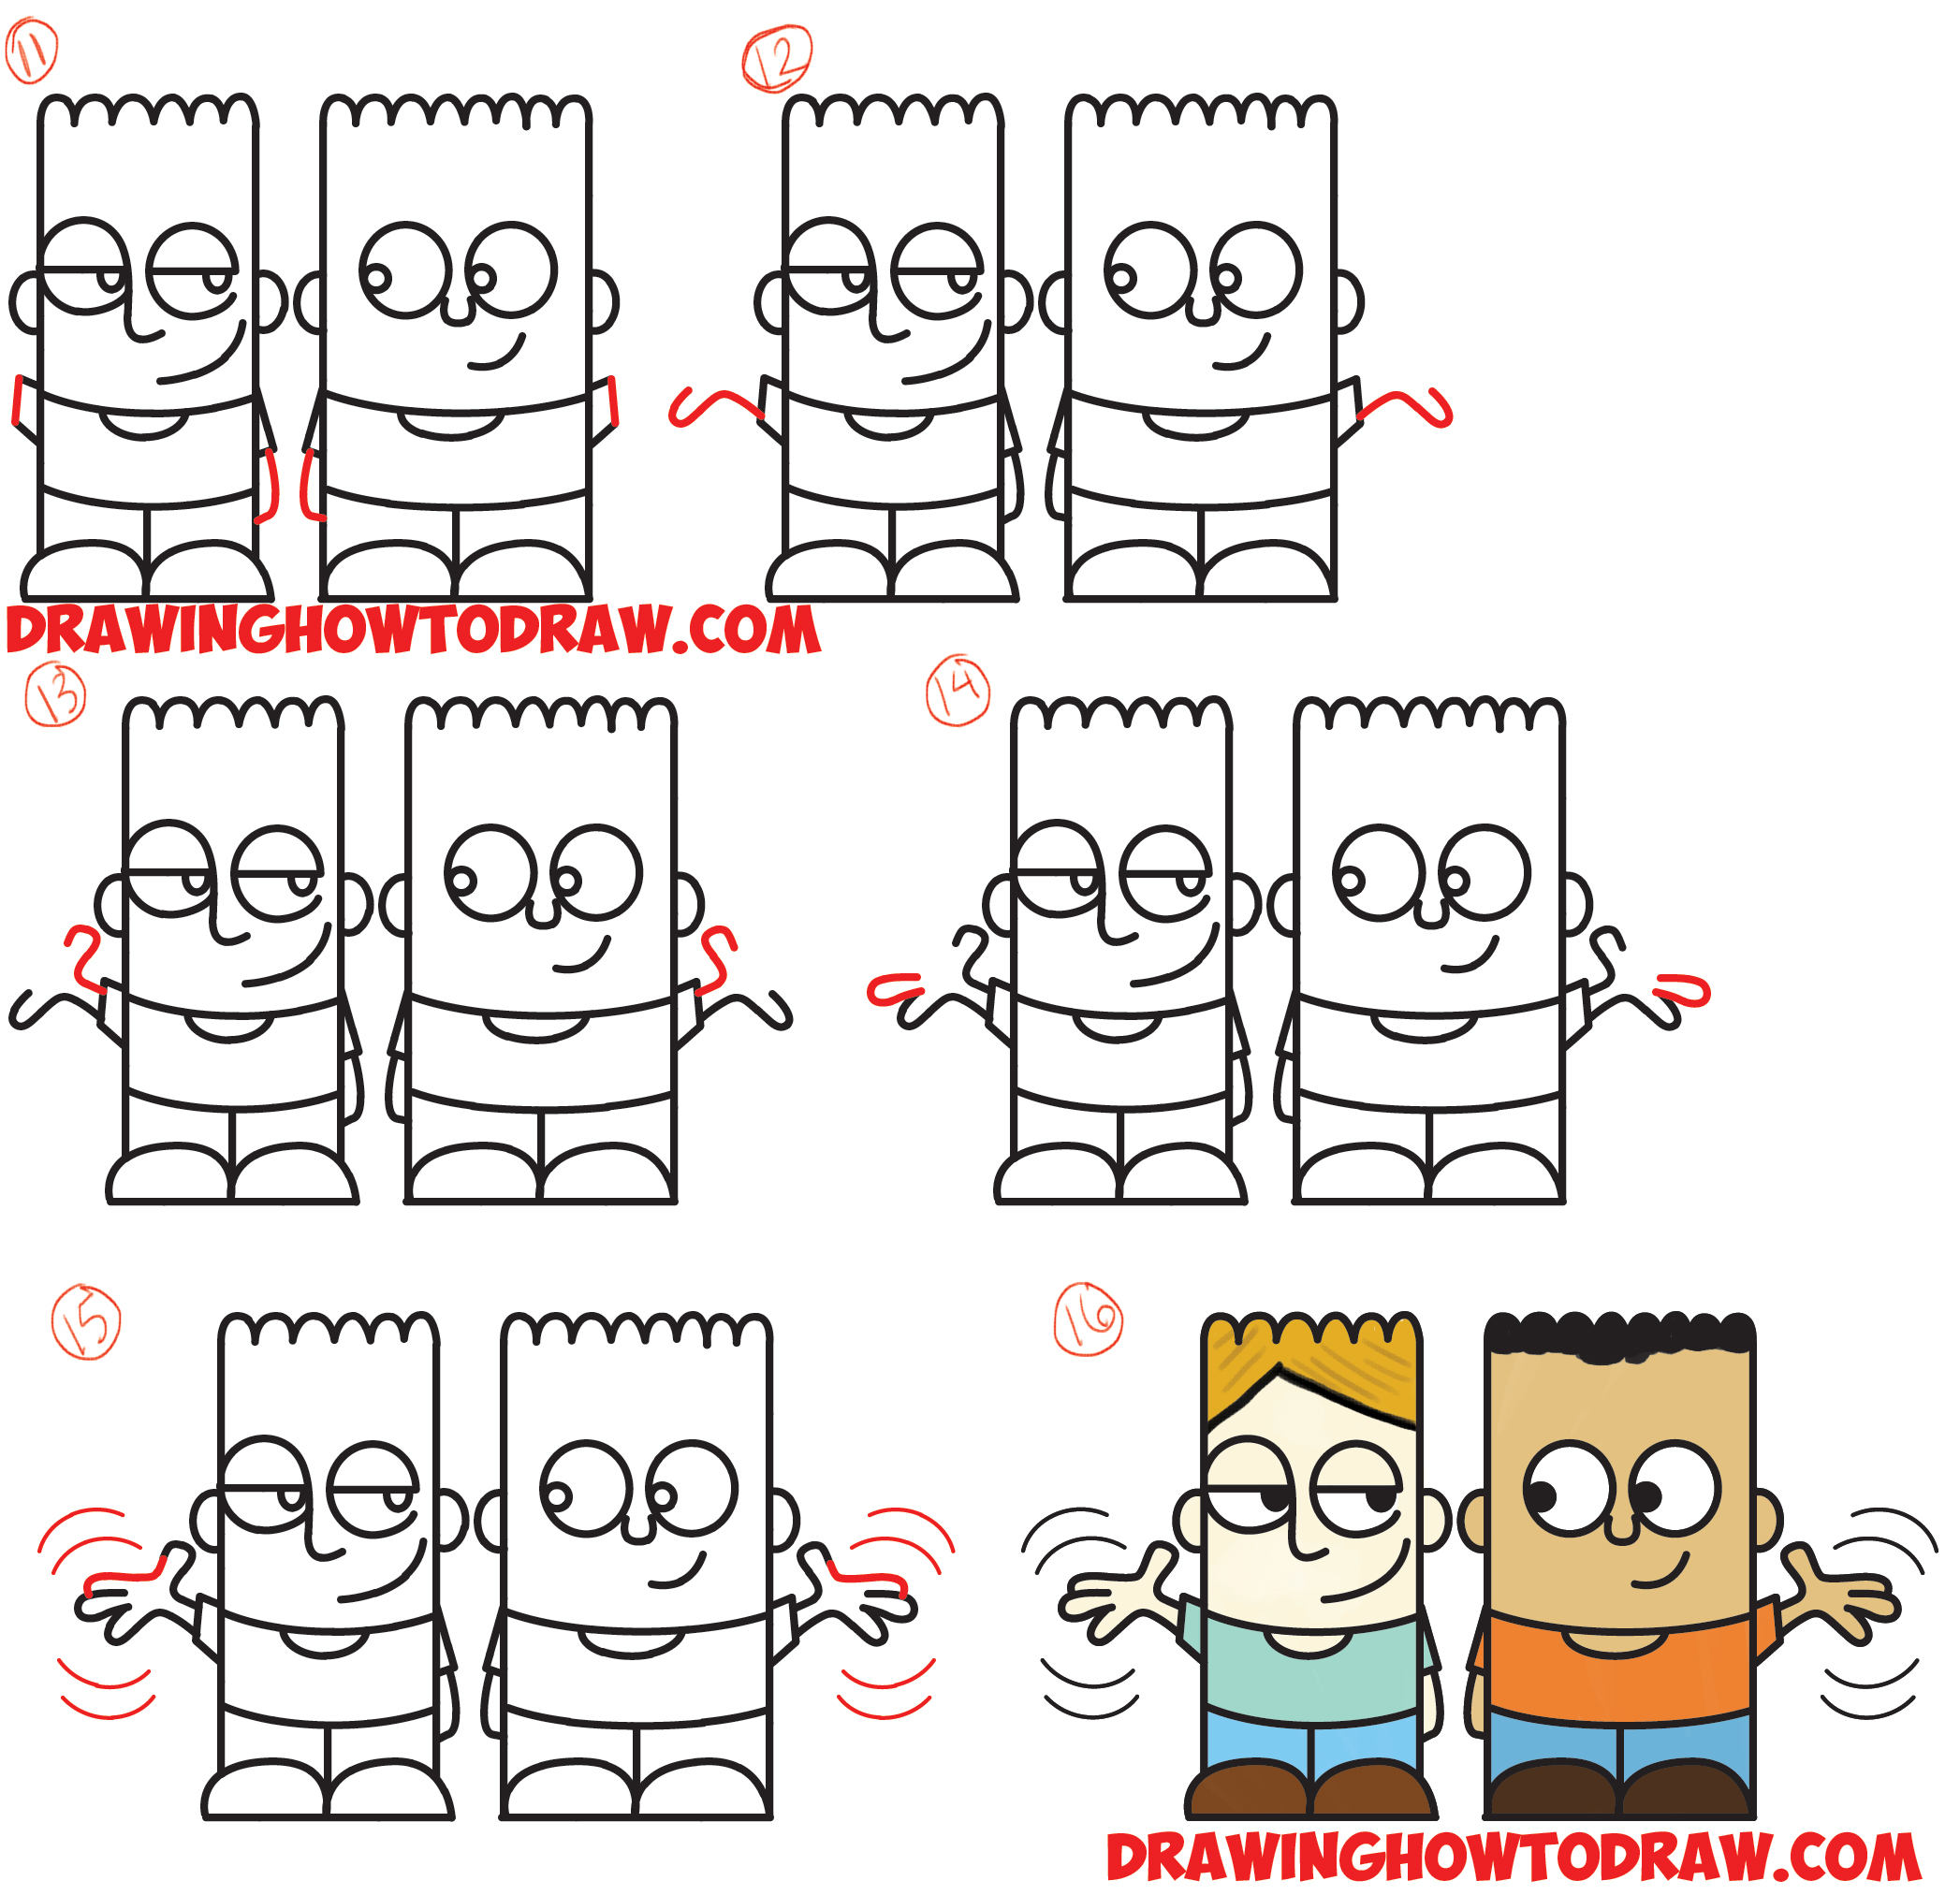 Great How To Draw Cartoon Characters Step By Step in the world The ultimate guide 